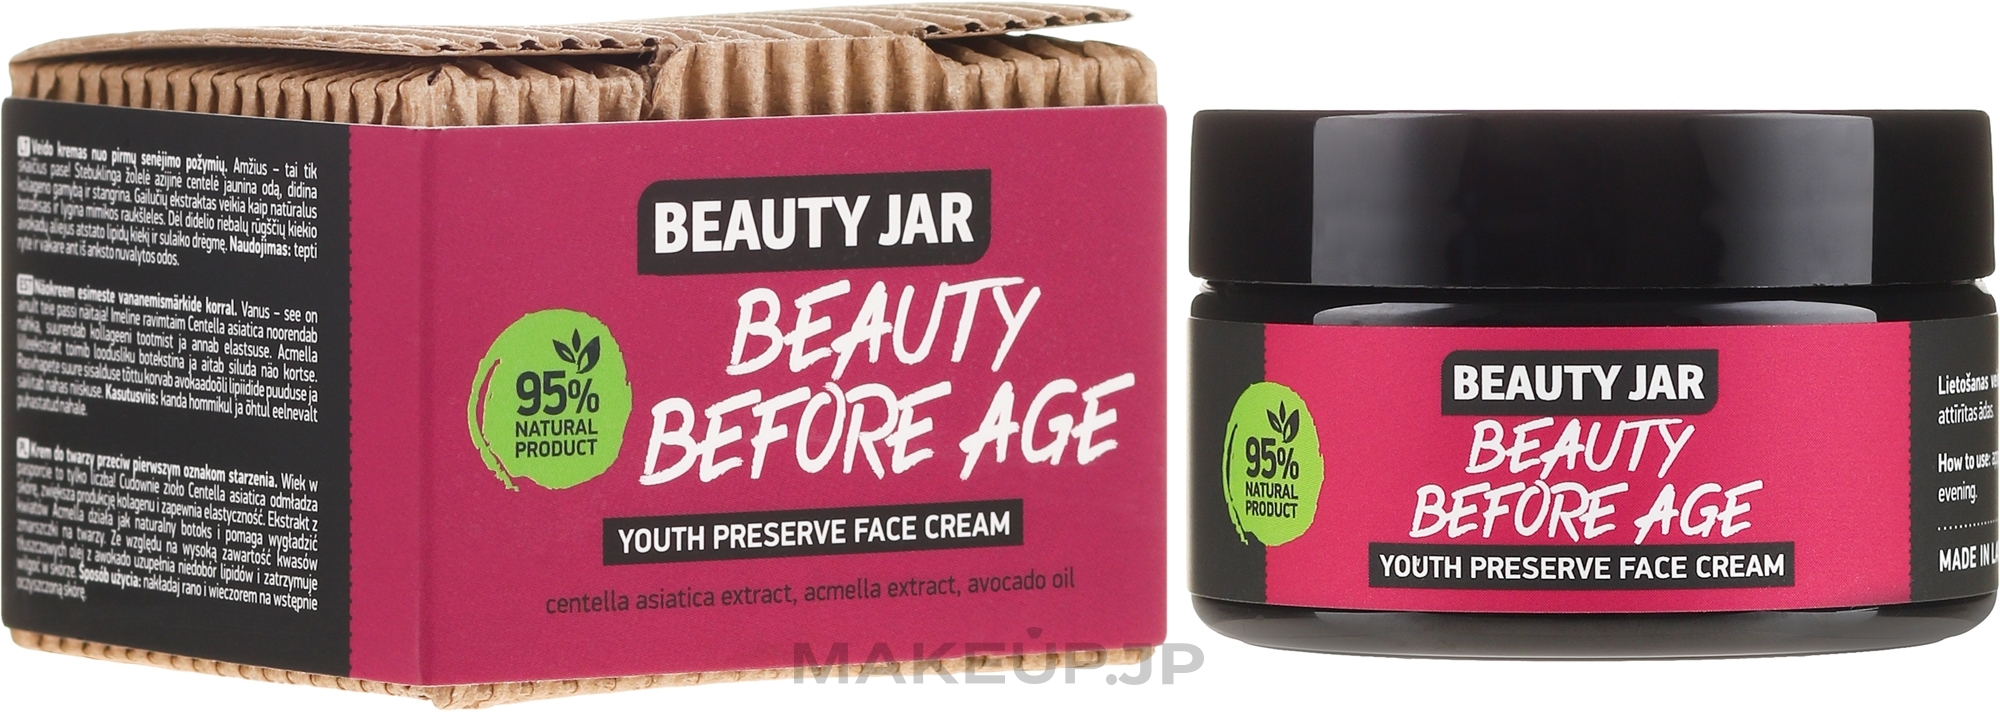 Anti-Aging Face Cream - Beauty Jar Beauty Before Age Youth Preserve Face Cream — photo 60 ml